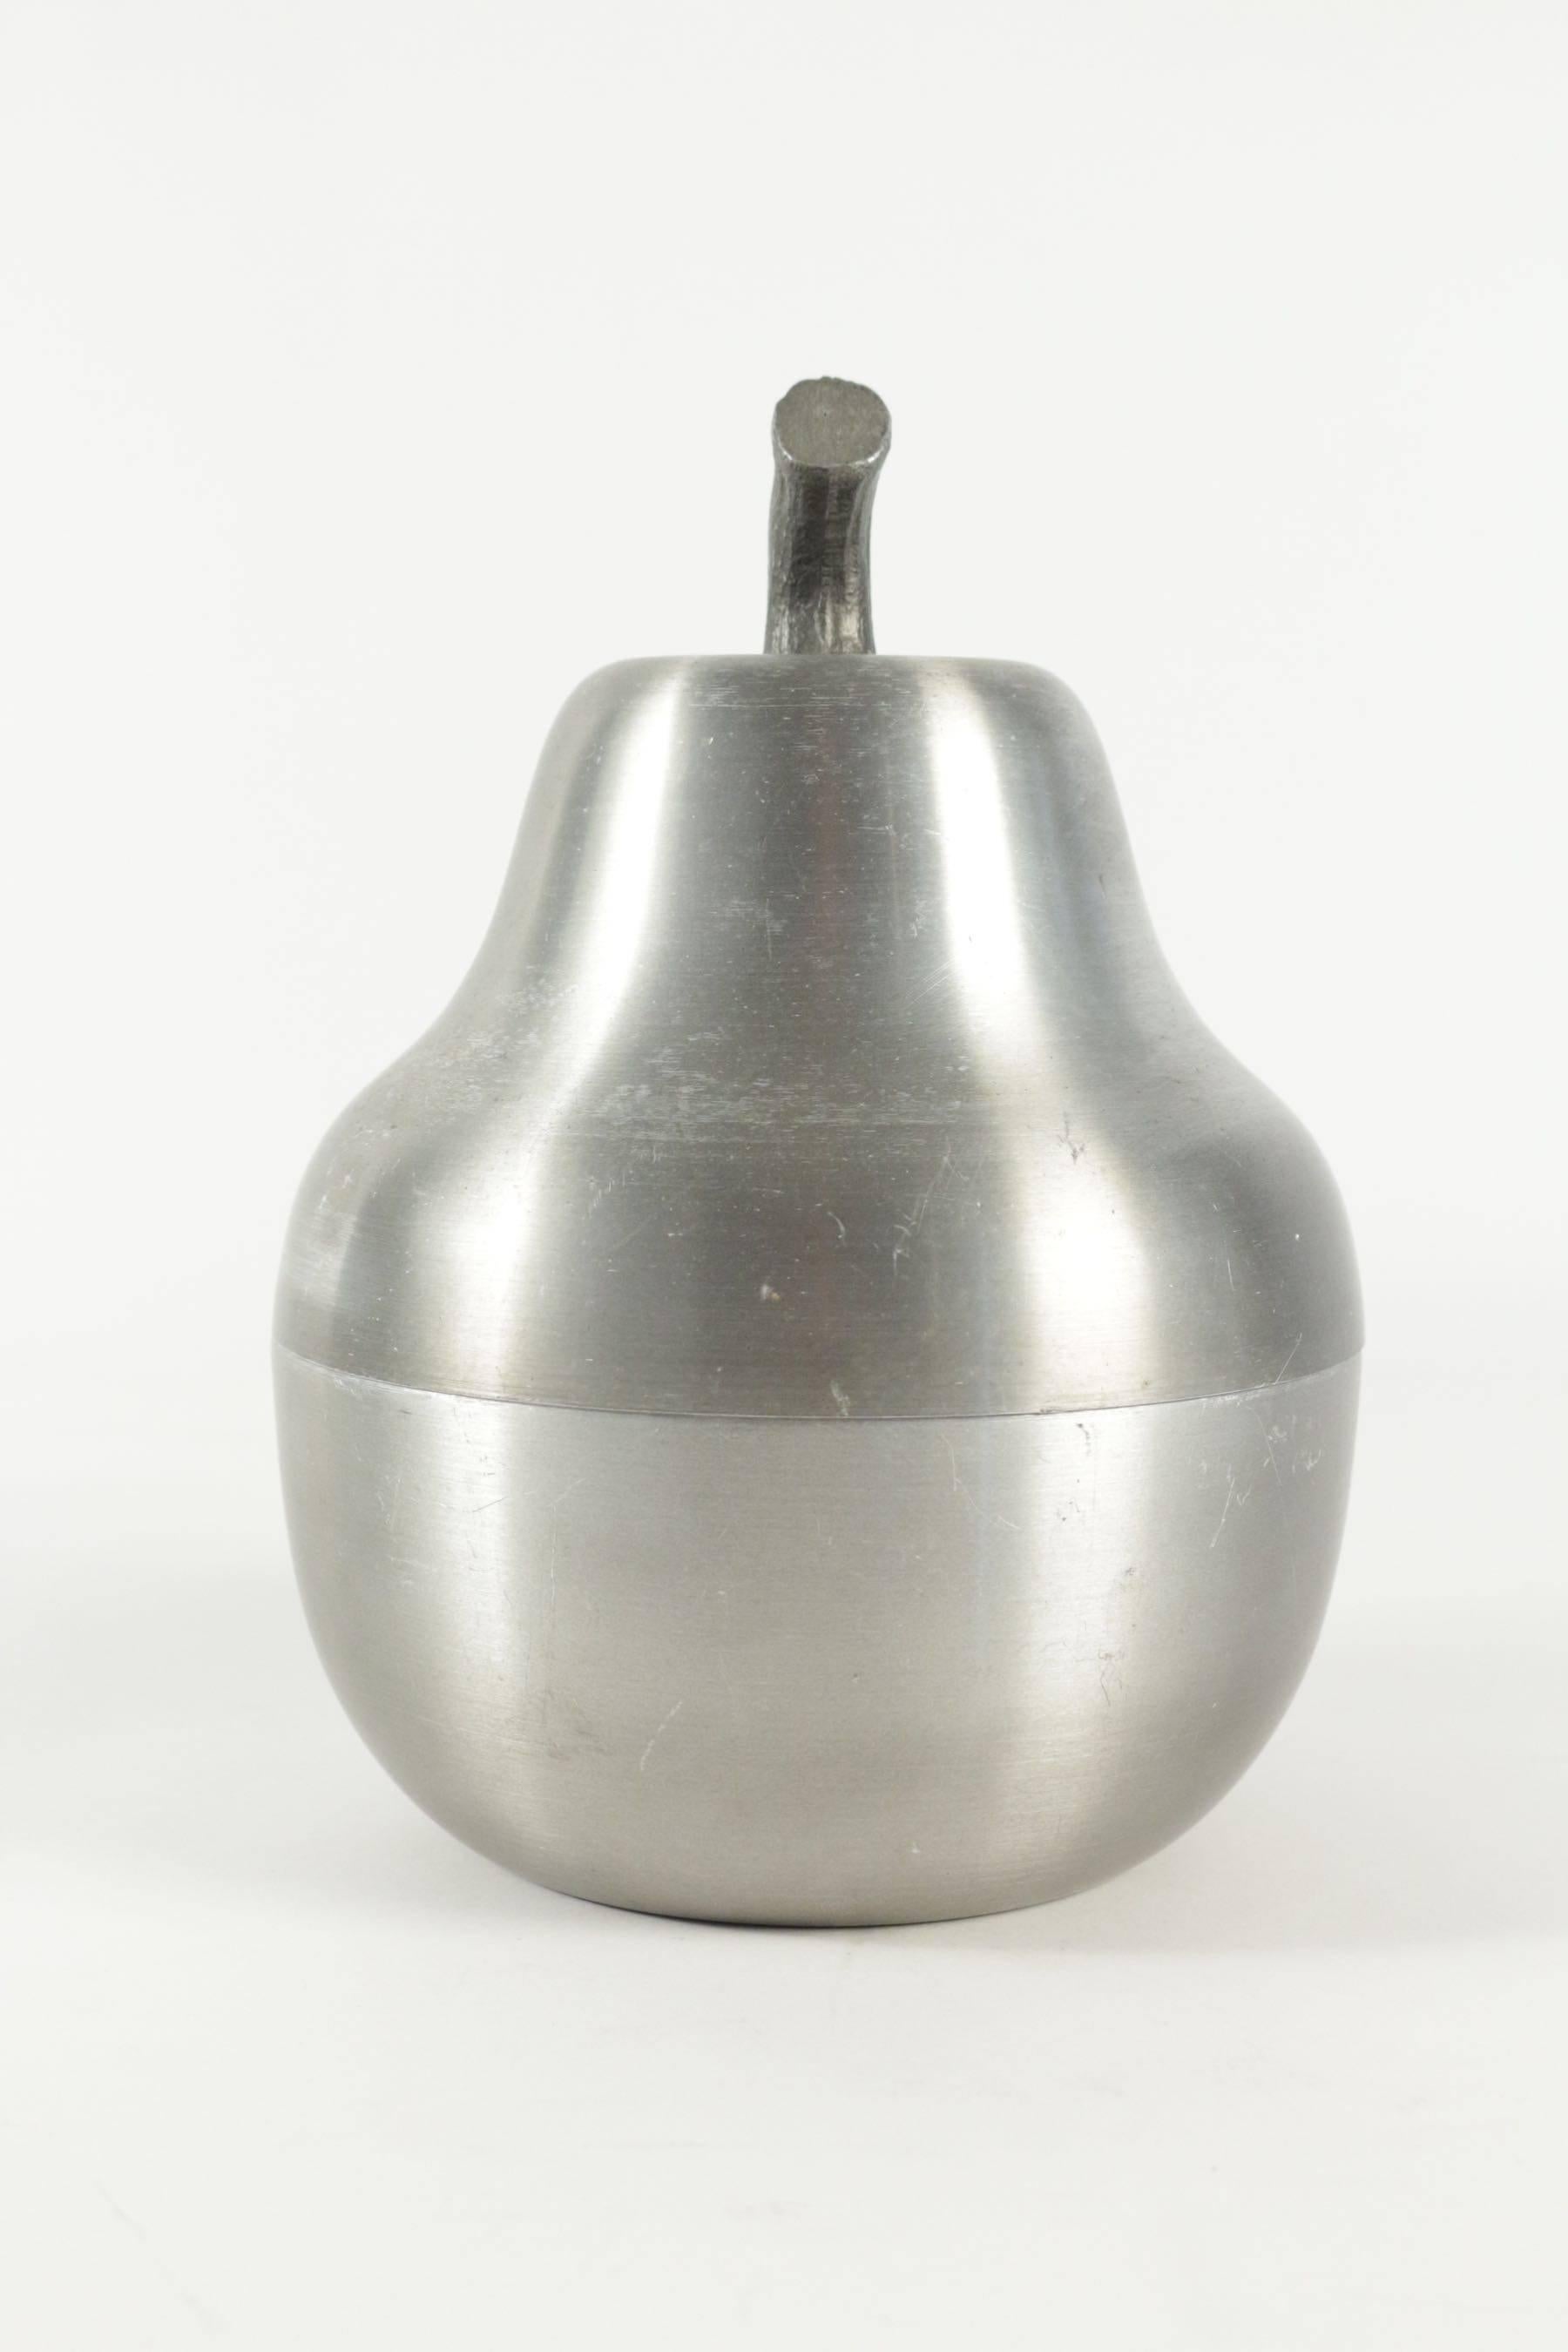 French Cool Ice Bucket in the Shape of a Pear in Brushed Aluminum from the 1970s 